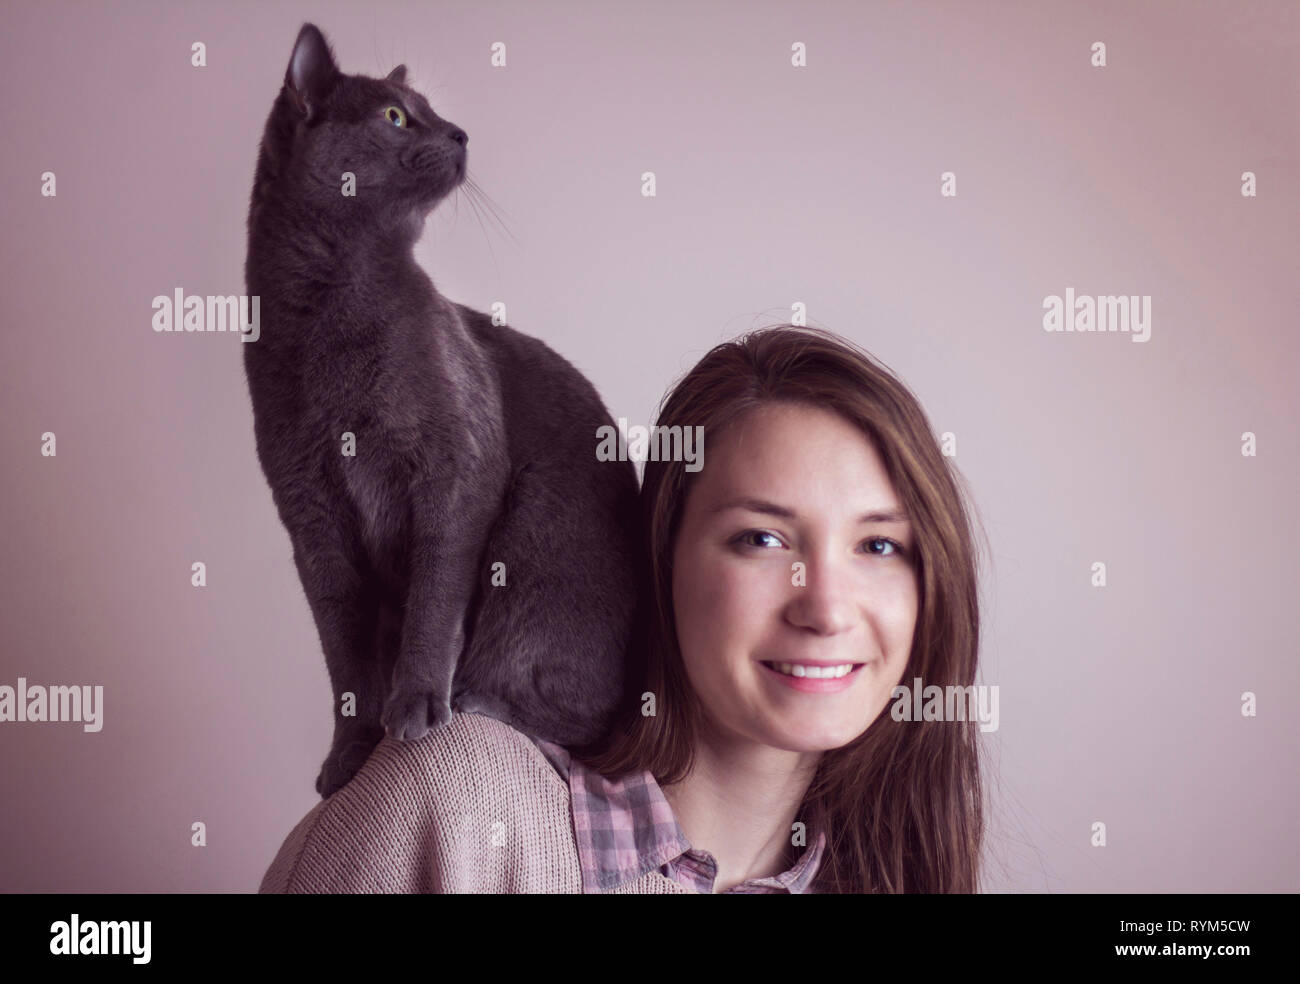 Woman with her funny pet cat sitting on her shoulders Stock Photo